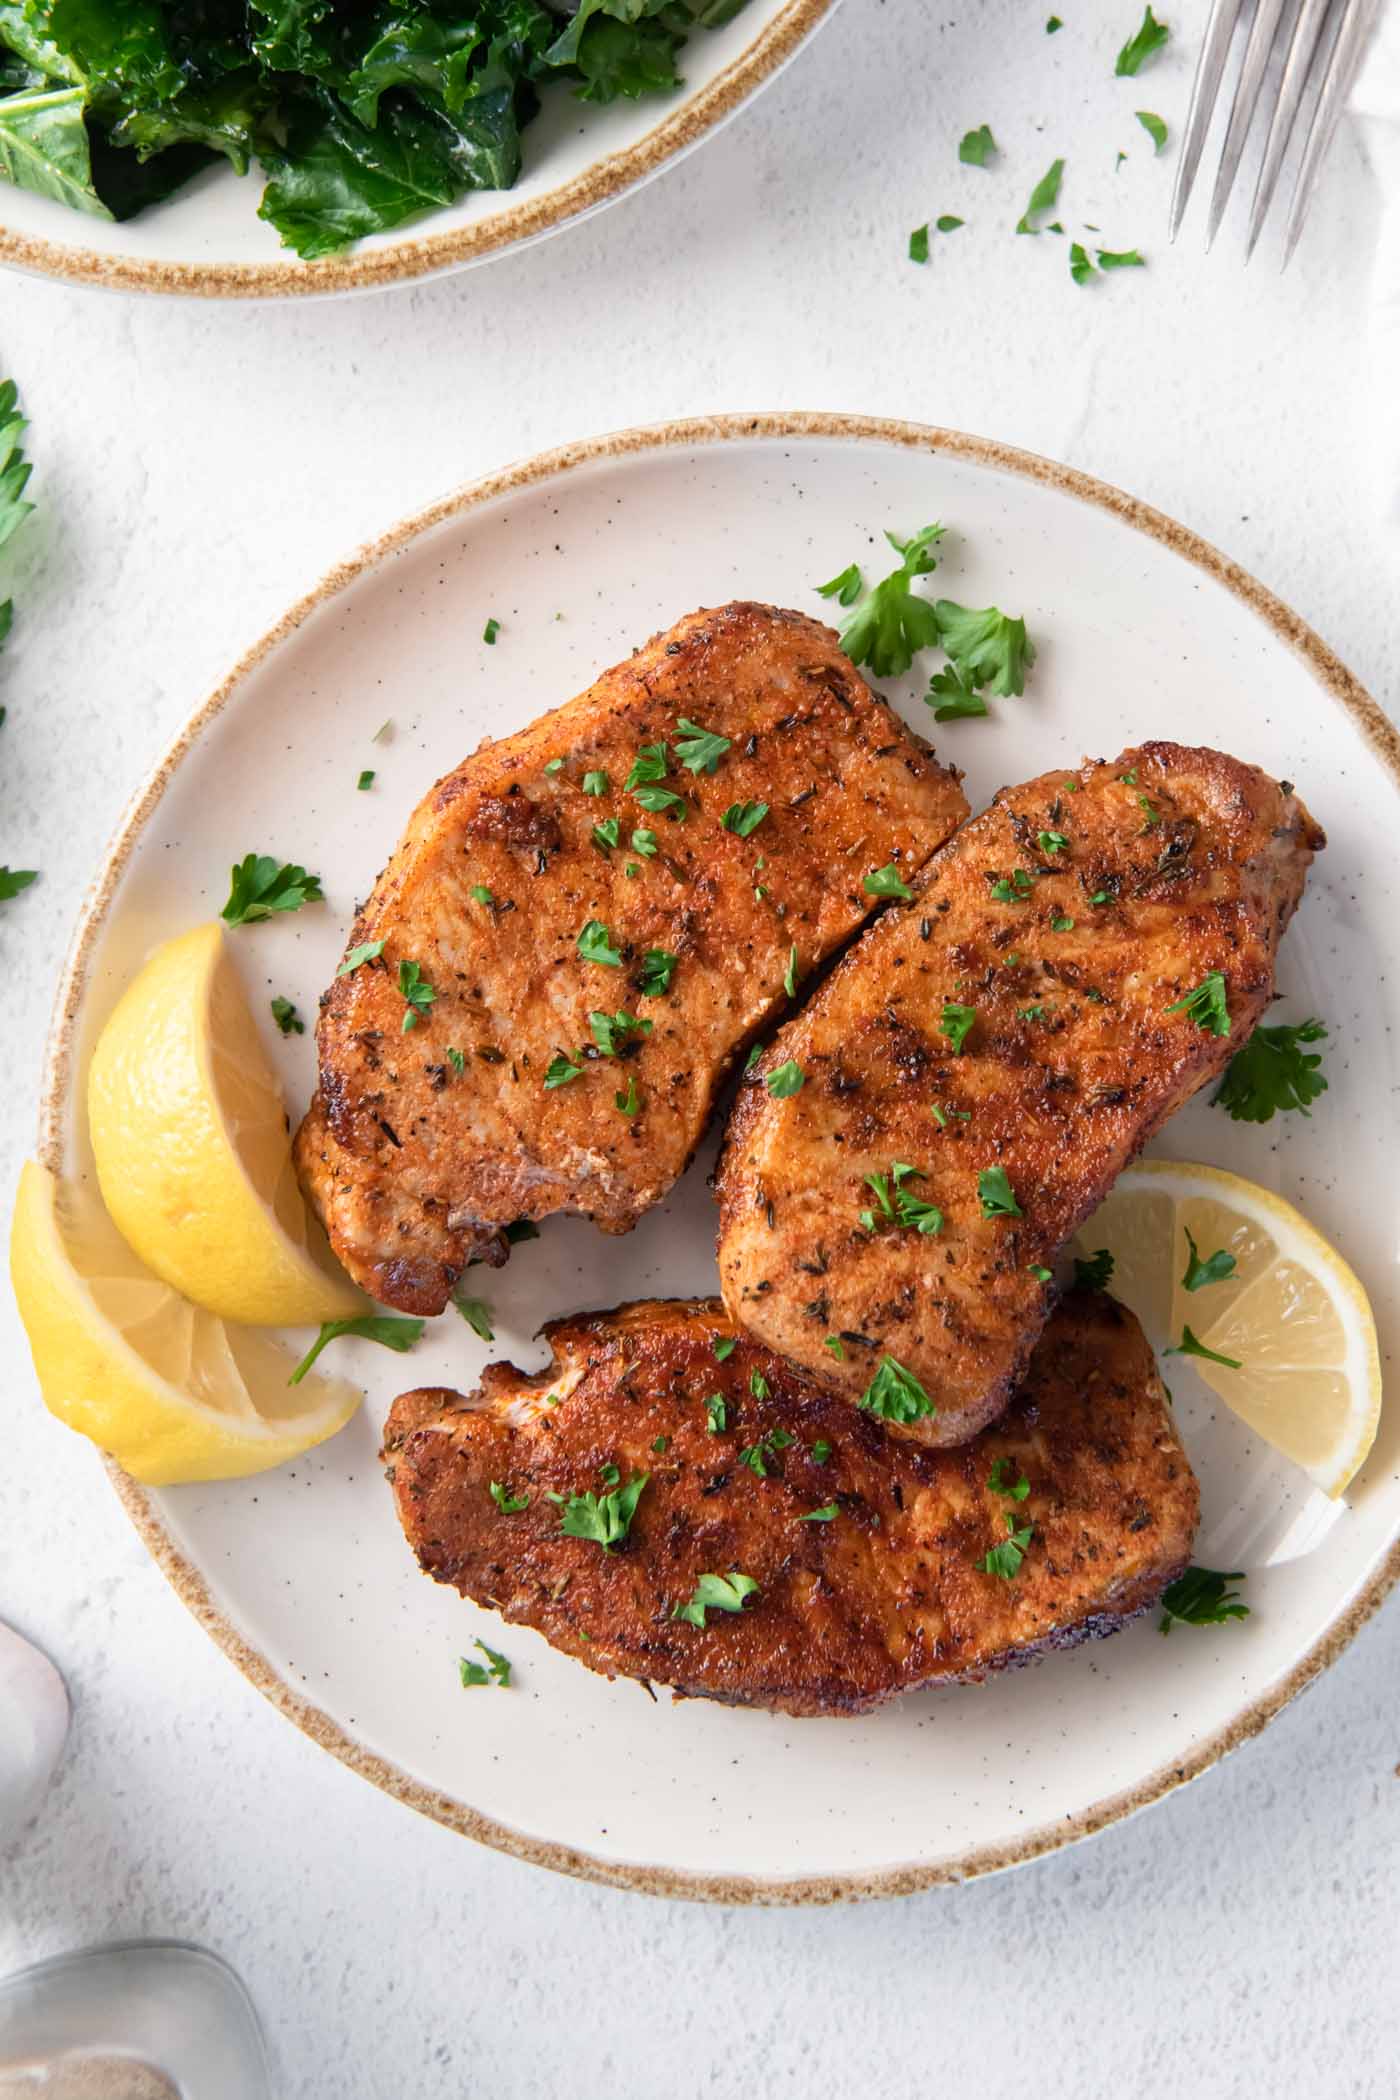 Three air fryer pork chops on a plate with parsley and lemon garnish.